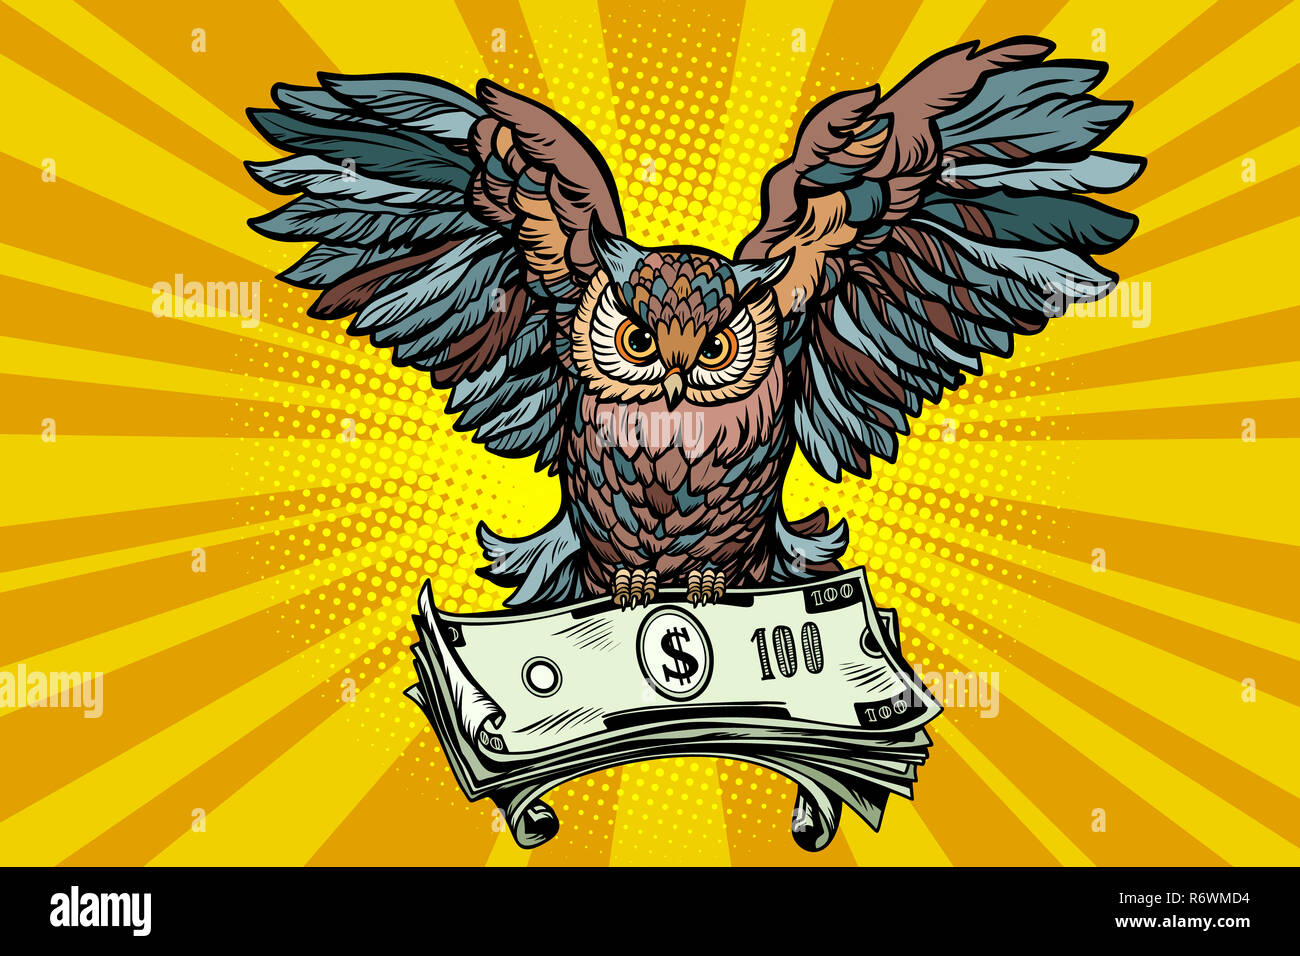 Owl Holding In Its Talons The Money Stock Photo Alamy